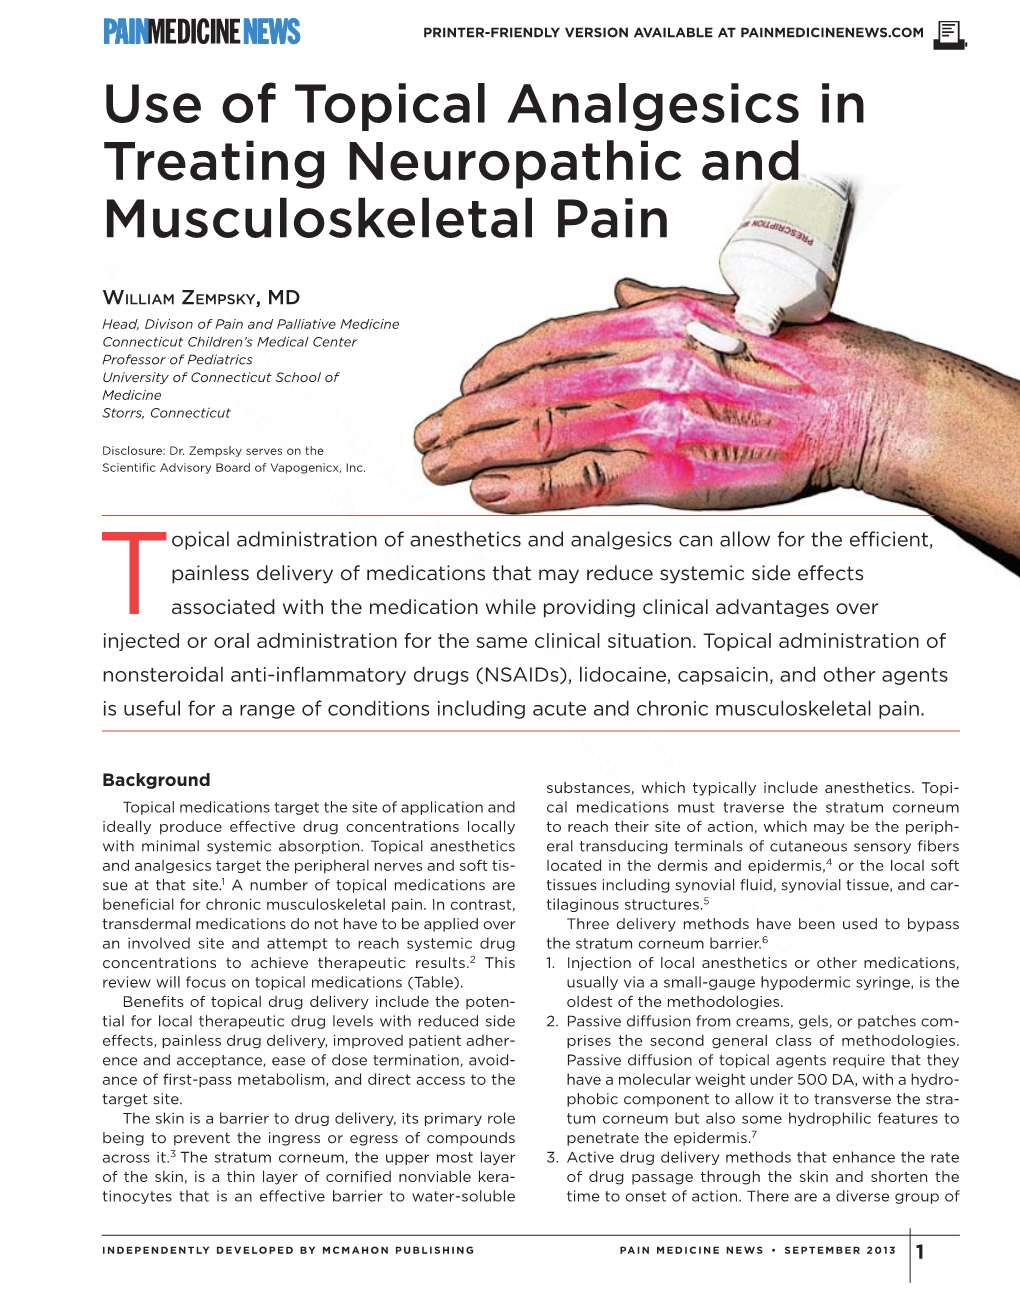 Use of Topical Analgesics in Treating Neuropathic and Musculoskeletal Pain All Rights Reserved